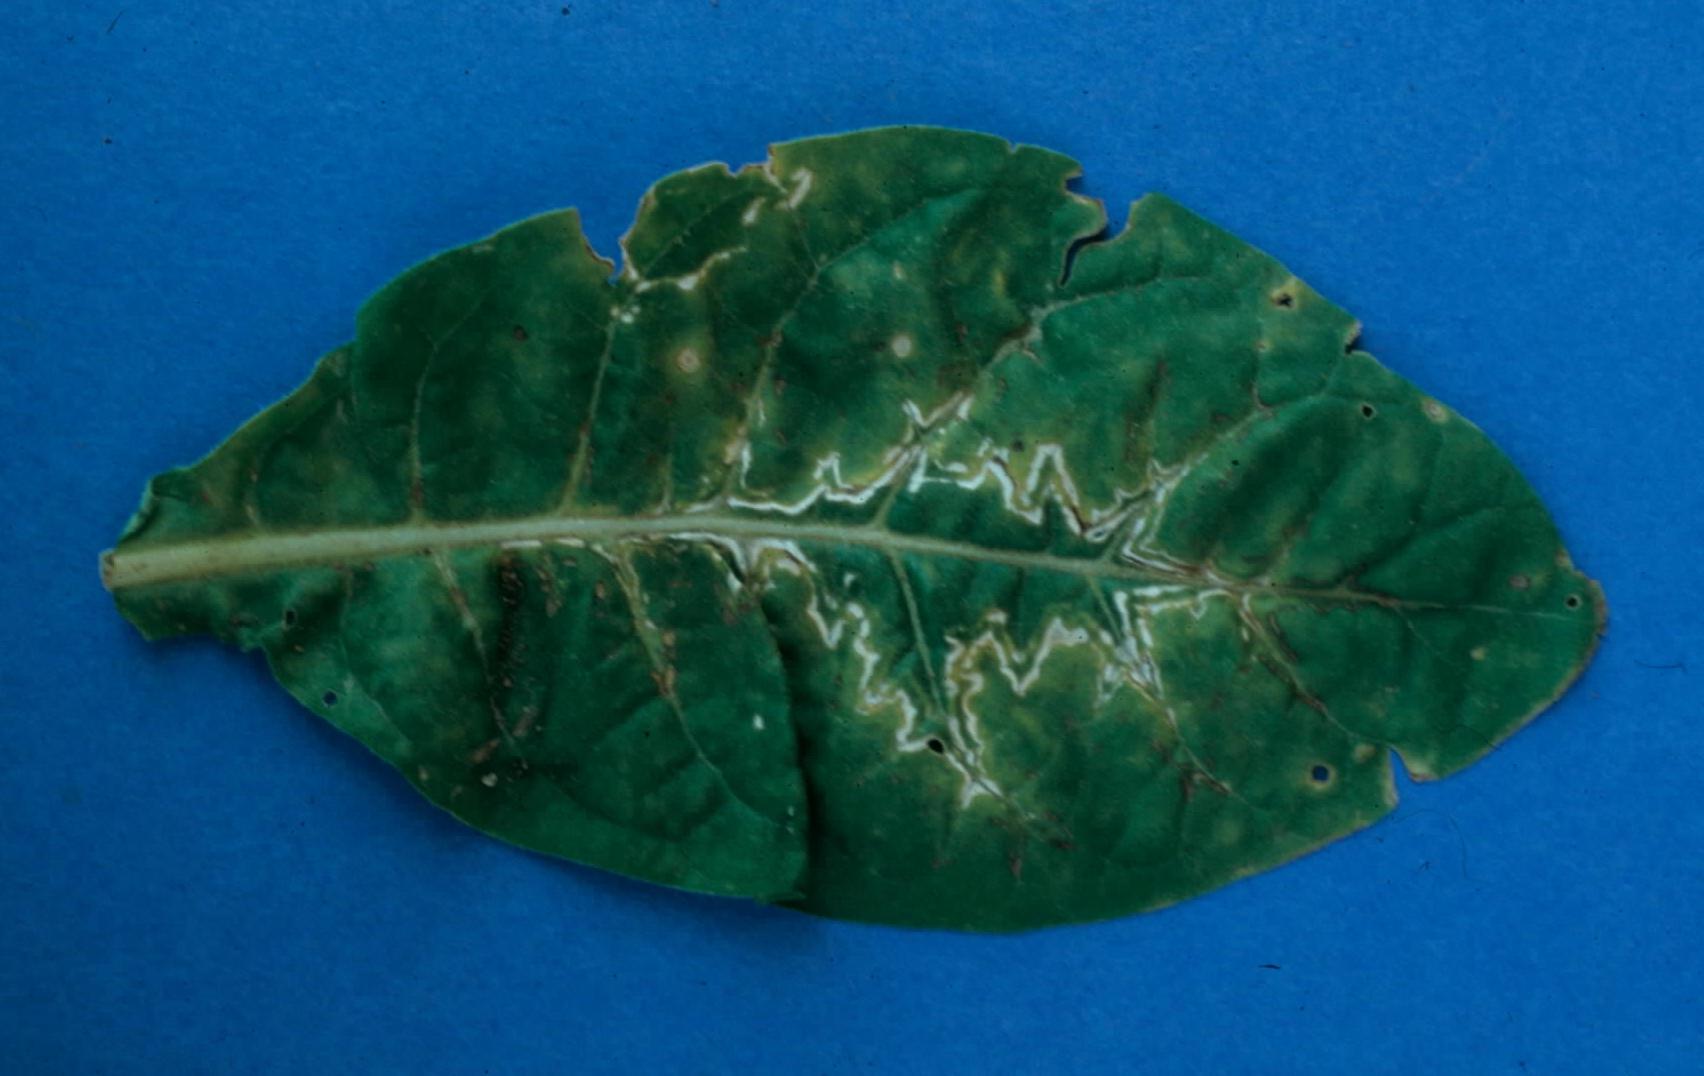 An "oak-leaf" pattern is also commonly observed on plants infected with tobacco ringspot virus. (Photo: Cheryl Kaiser, UK)